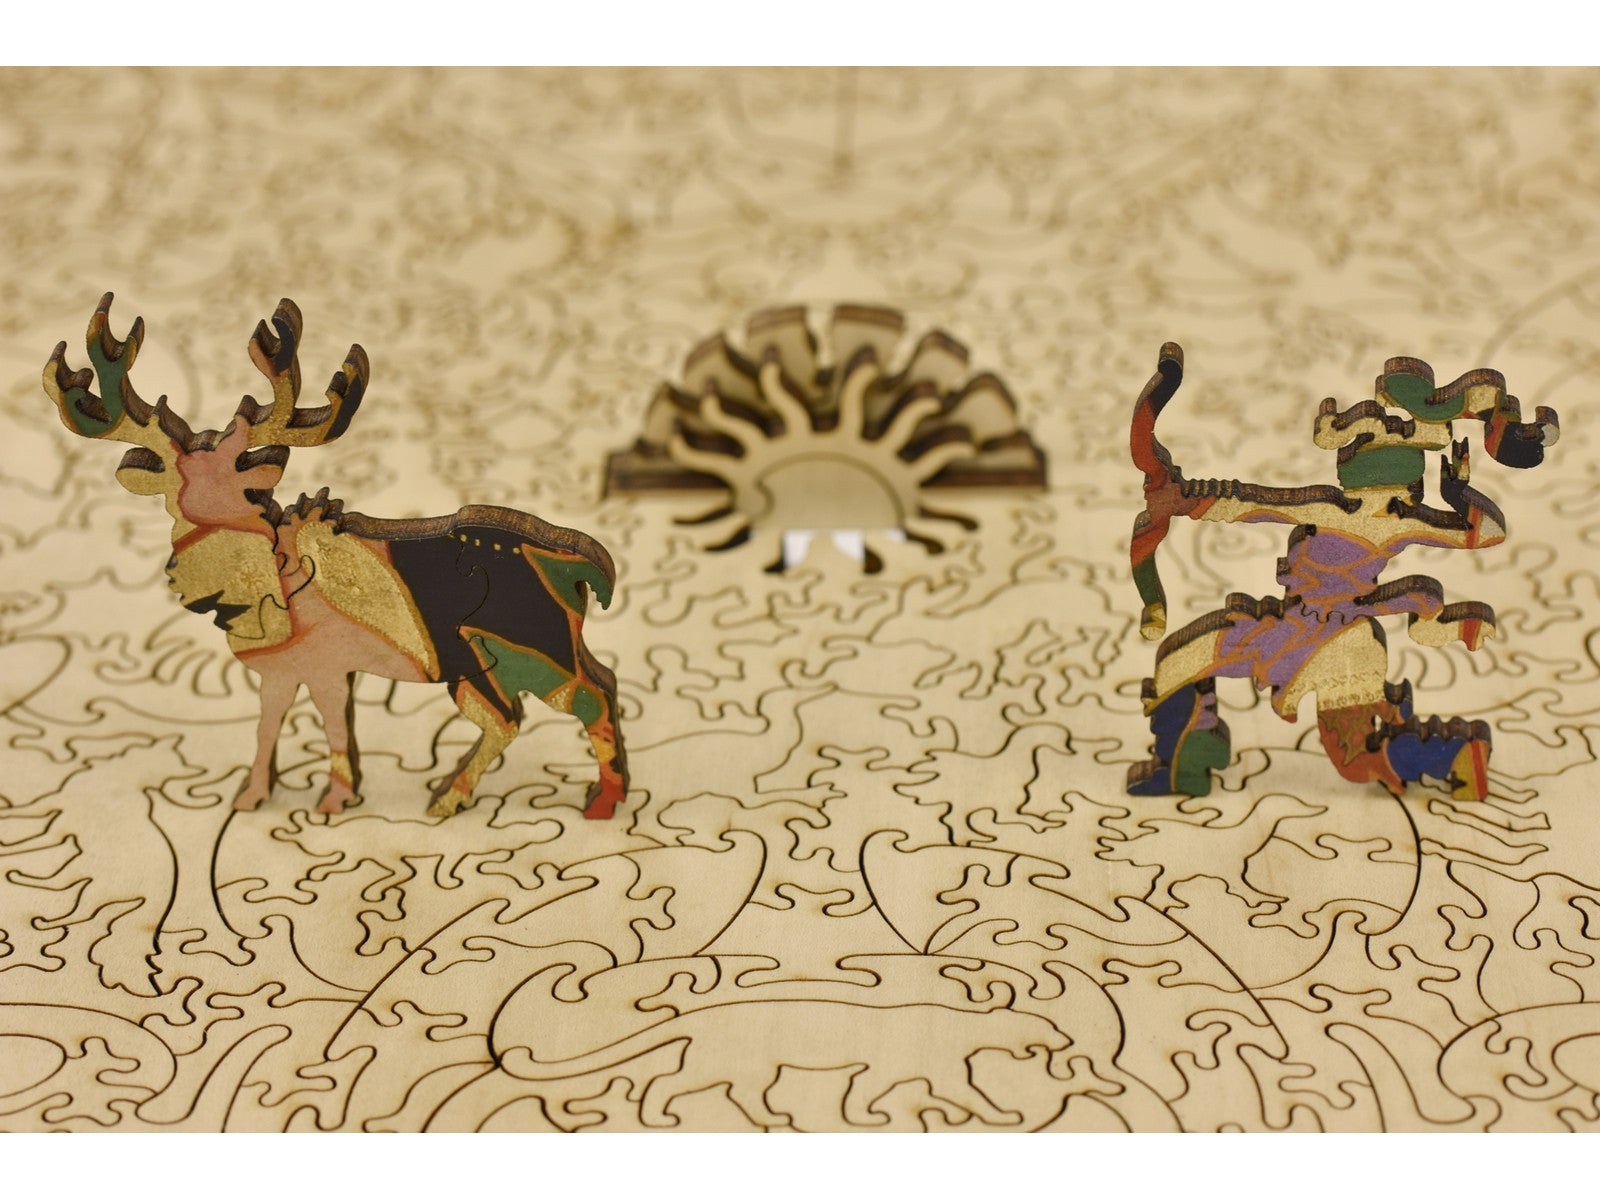 A closeup of pieces in the shape of a deer and a huntress sitting on the puzzle.